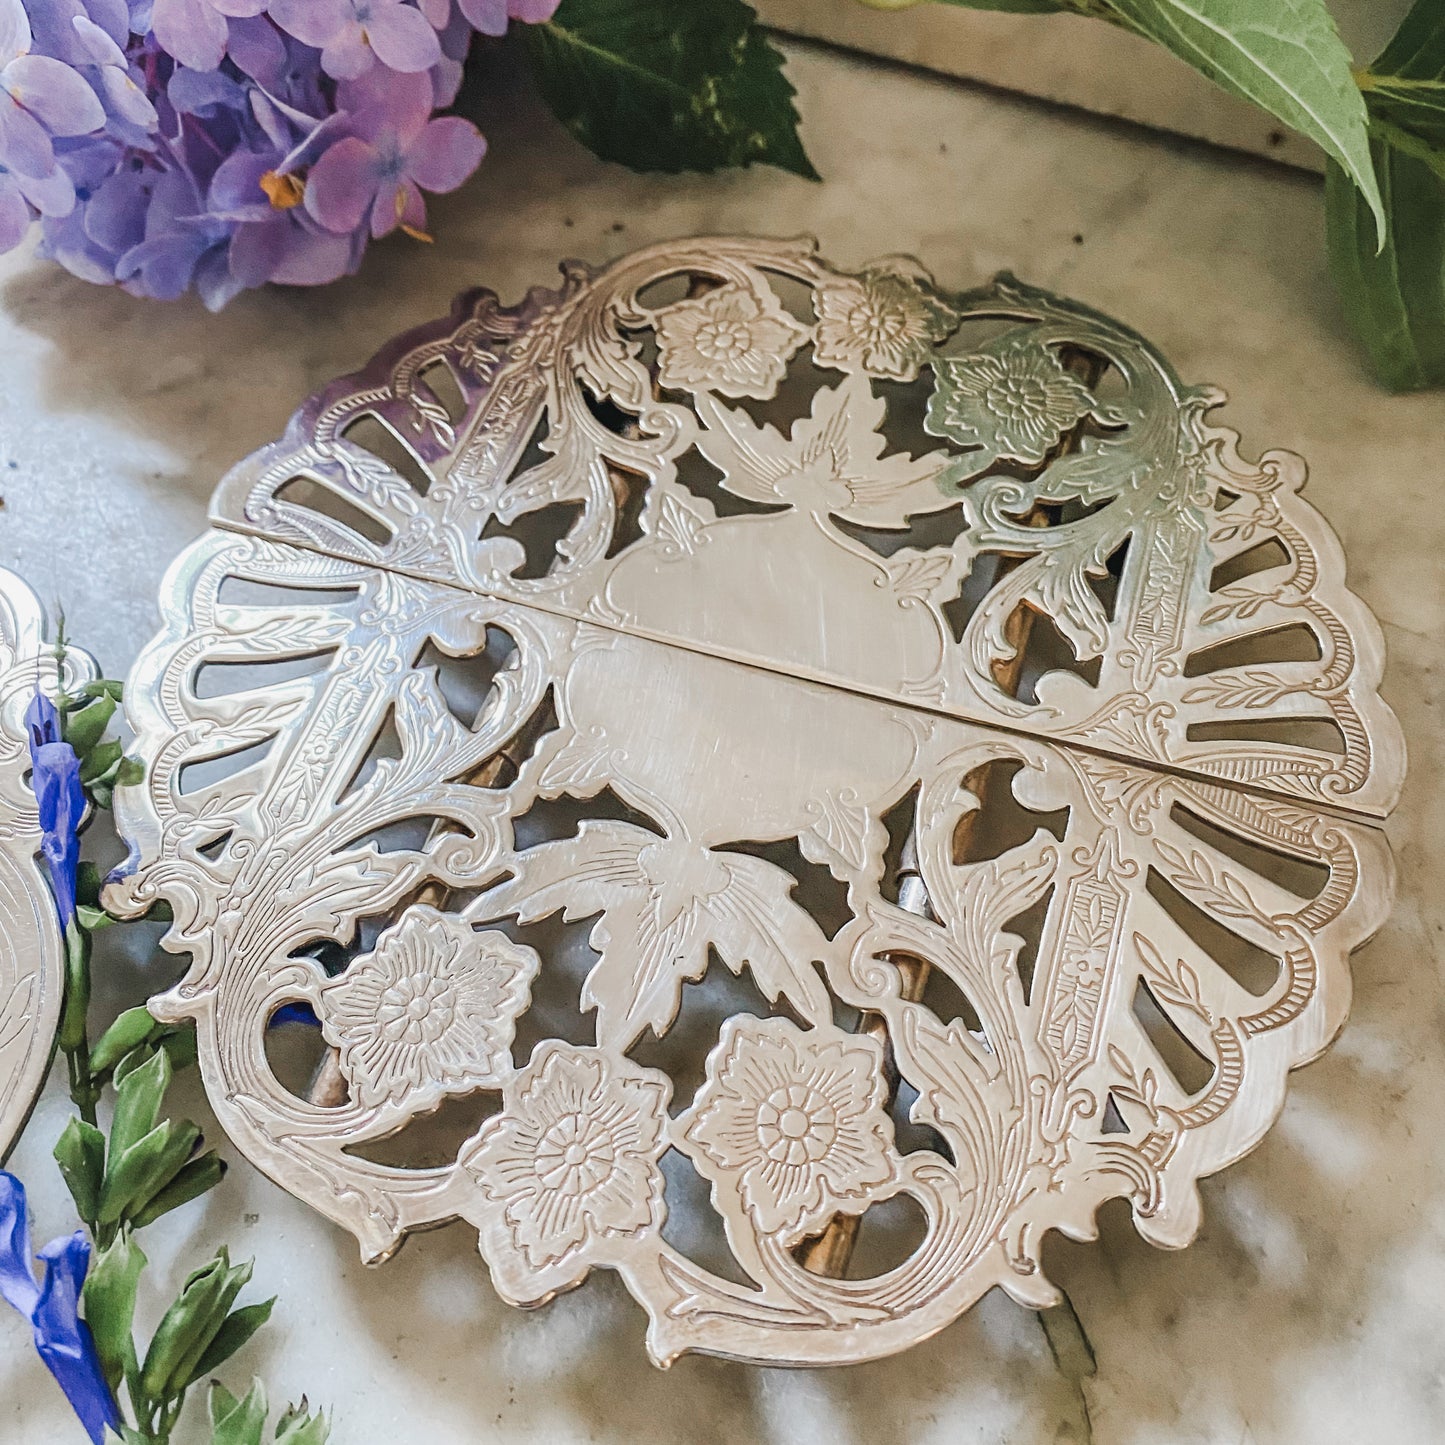 3 Gorgeous Pierced Silver Trivets for One Price!